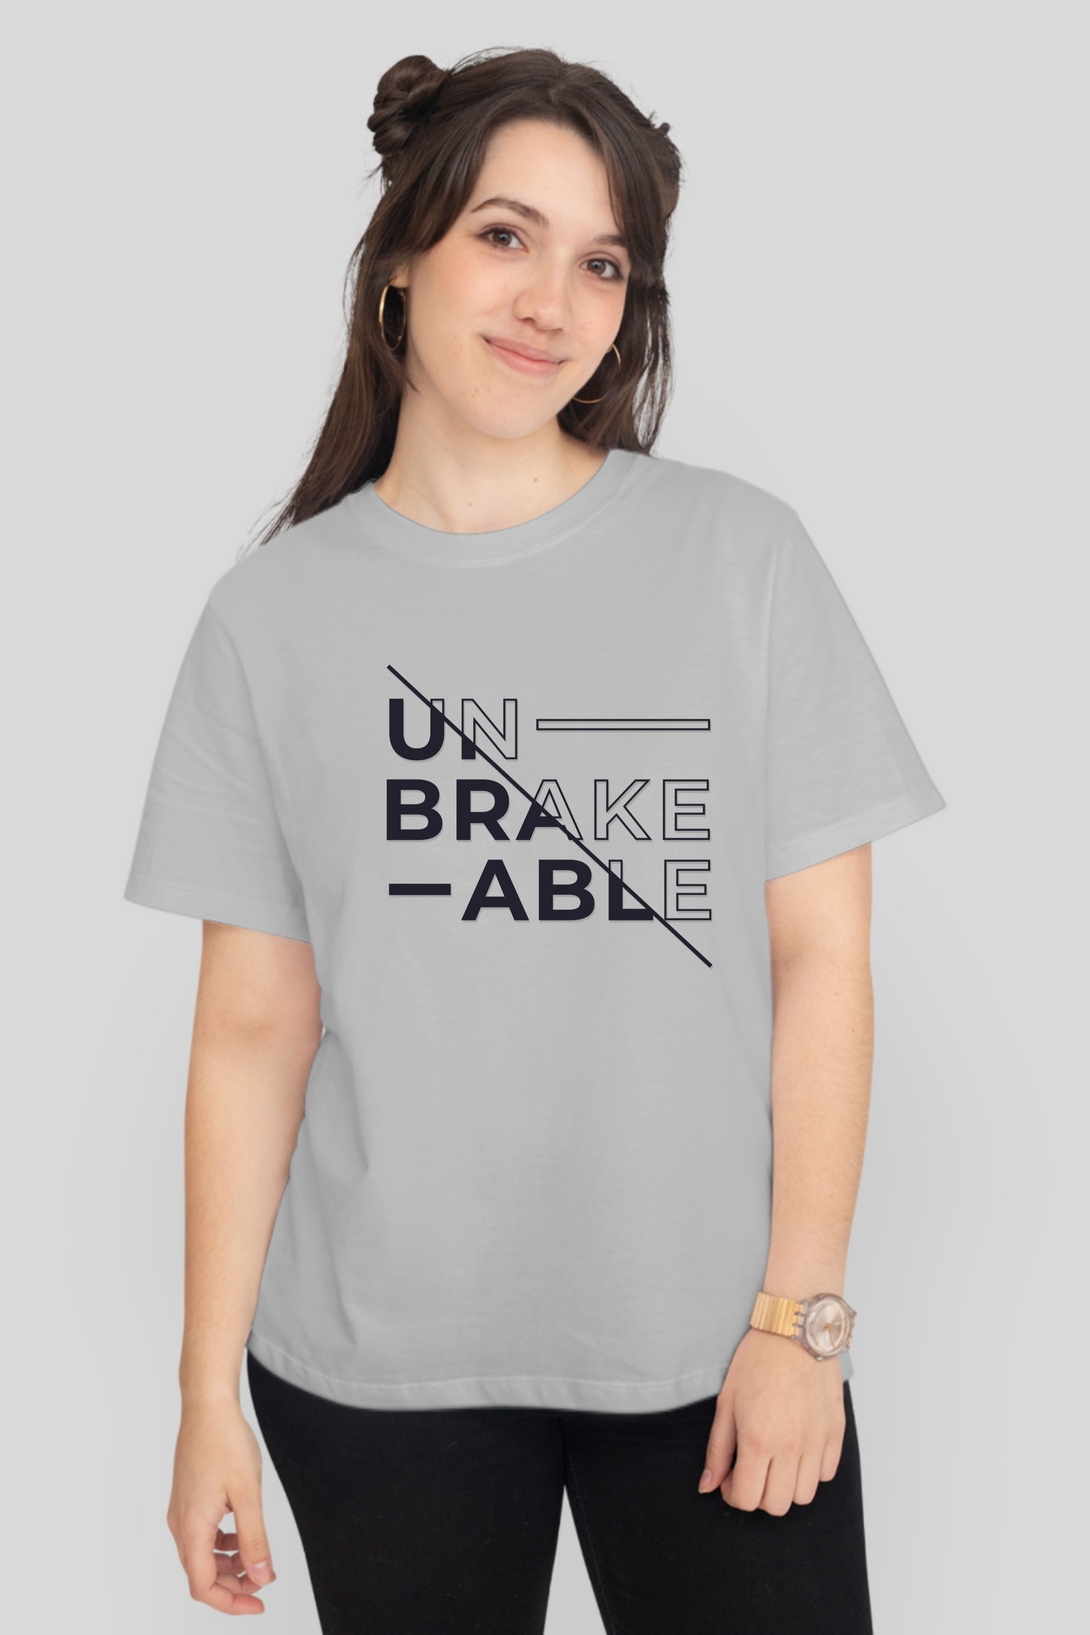 Unbreakable Printed T-Shirt For Women - WowWaves - 11